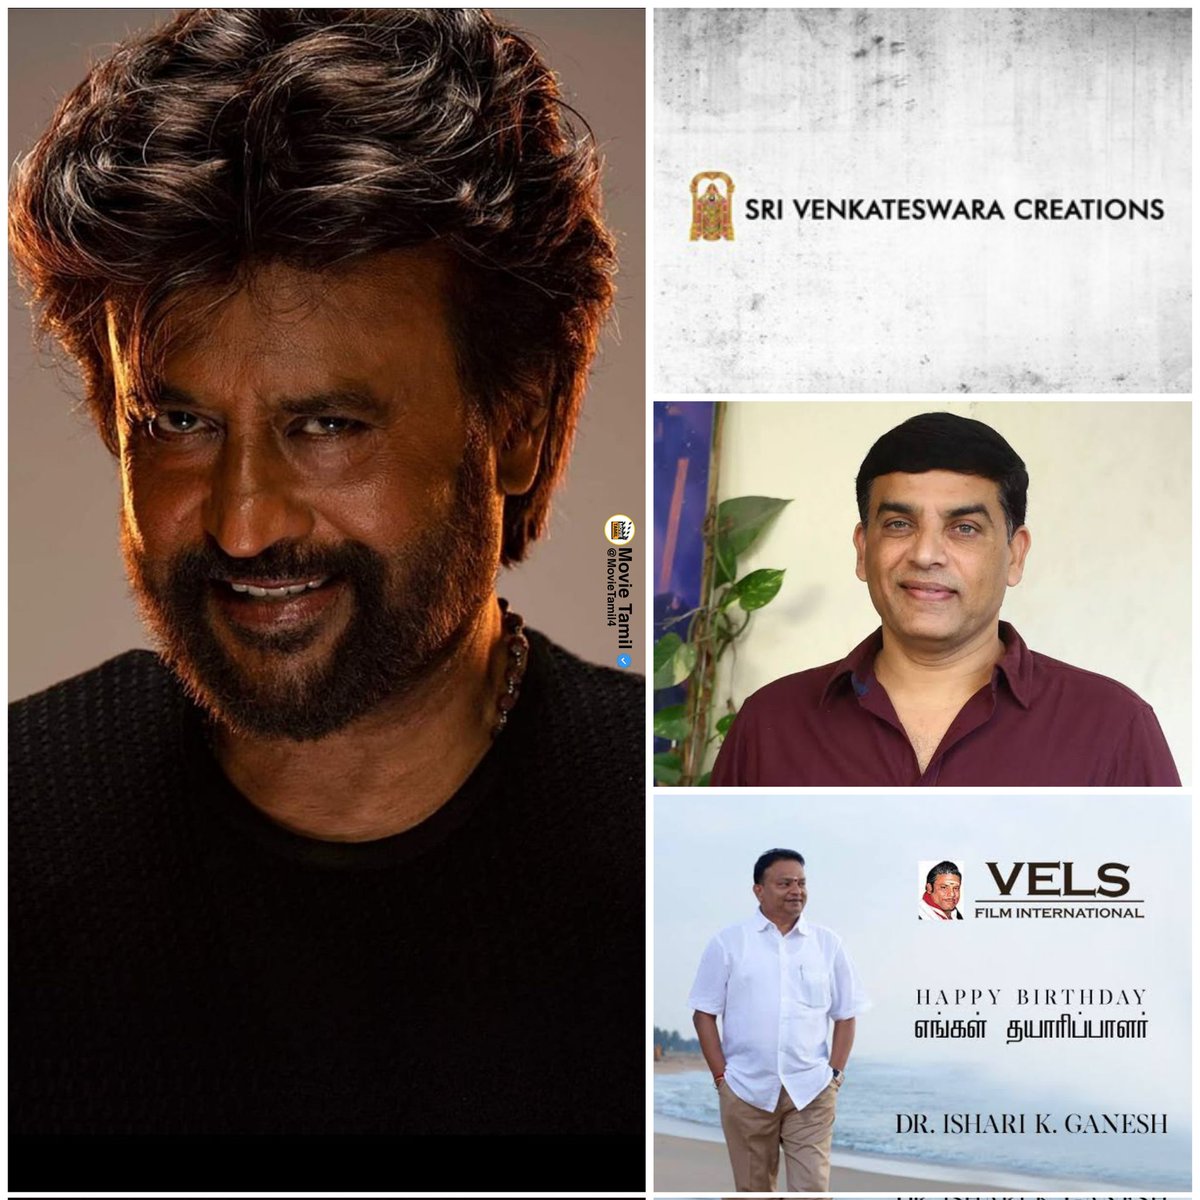 Exclusive : #Thalaivar173 Project 

 #Rajinikanth is currently acting in #Vettiyan. #Thalaivar171 will join the shoot of after completing this.

Next, it is reported that he has agreed to act in two films,

 This film is to be produced by VELS Film.